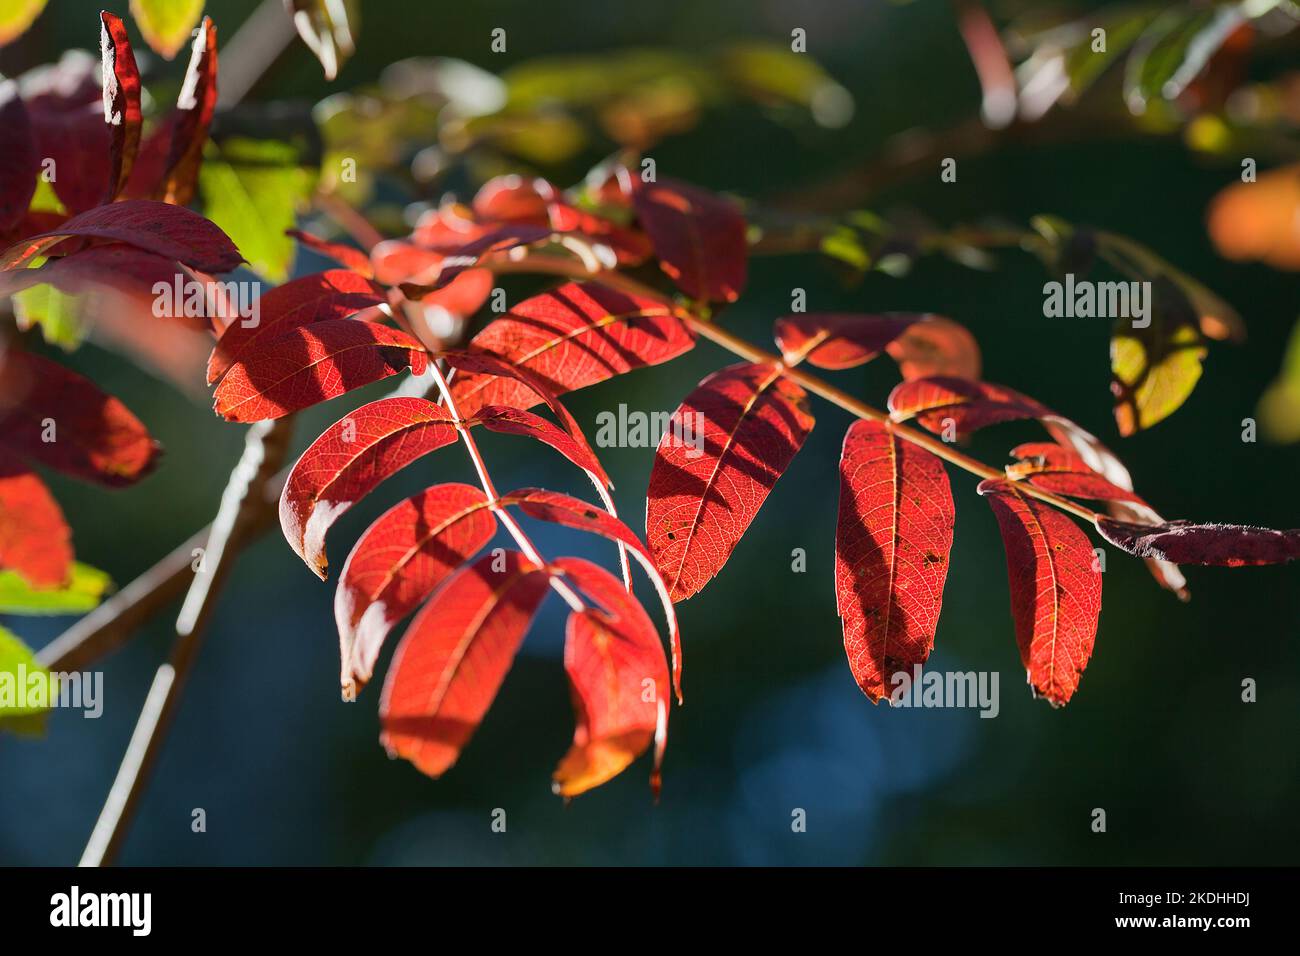 Bright red Sorbus leaves against a blurred background in the fall season. Woodland autumn colored Sorbus leaves. The season of colors in the forest. Stock Photo